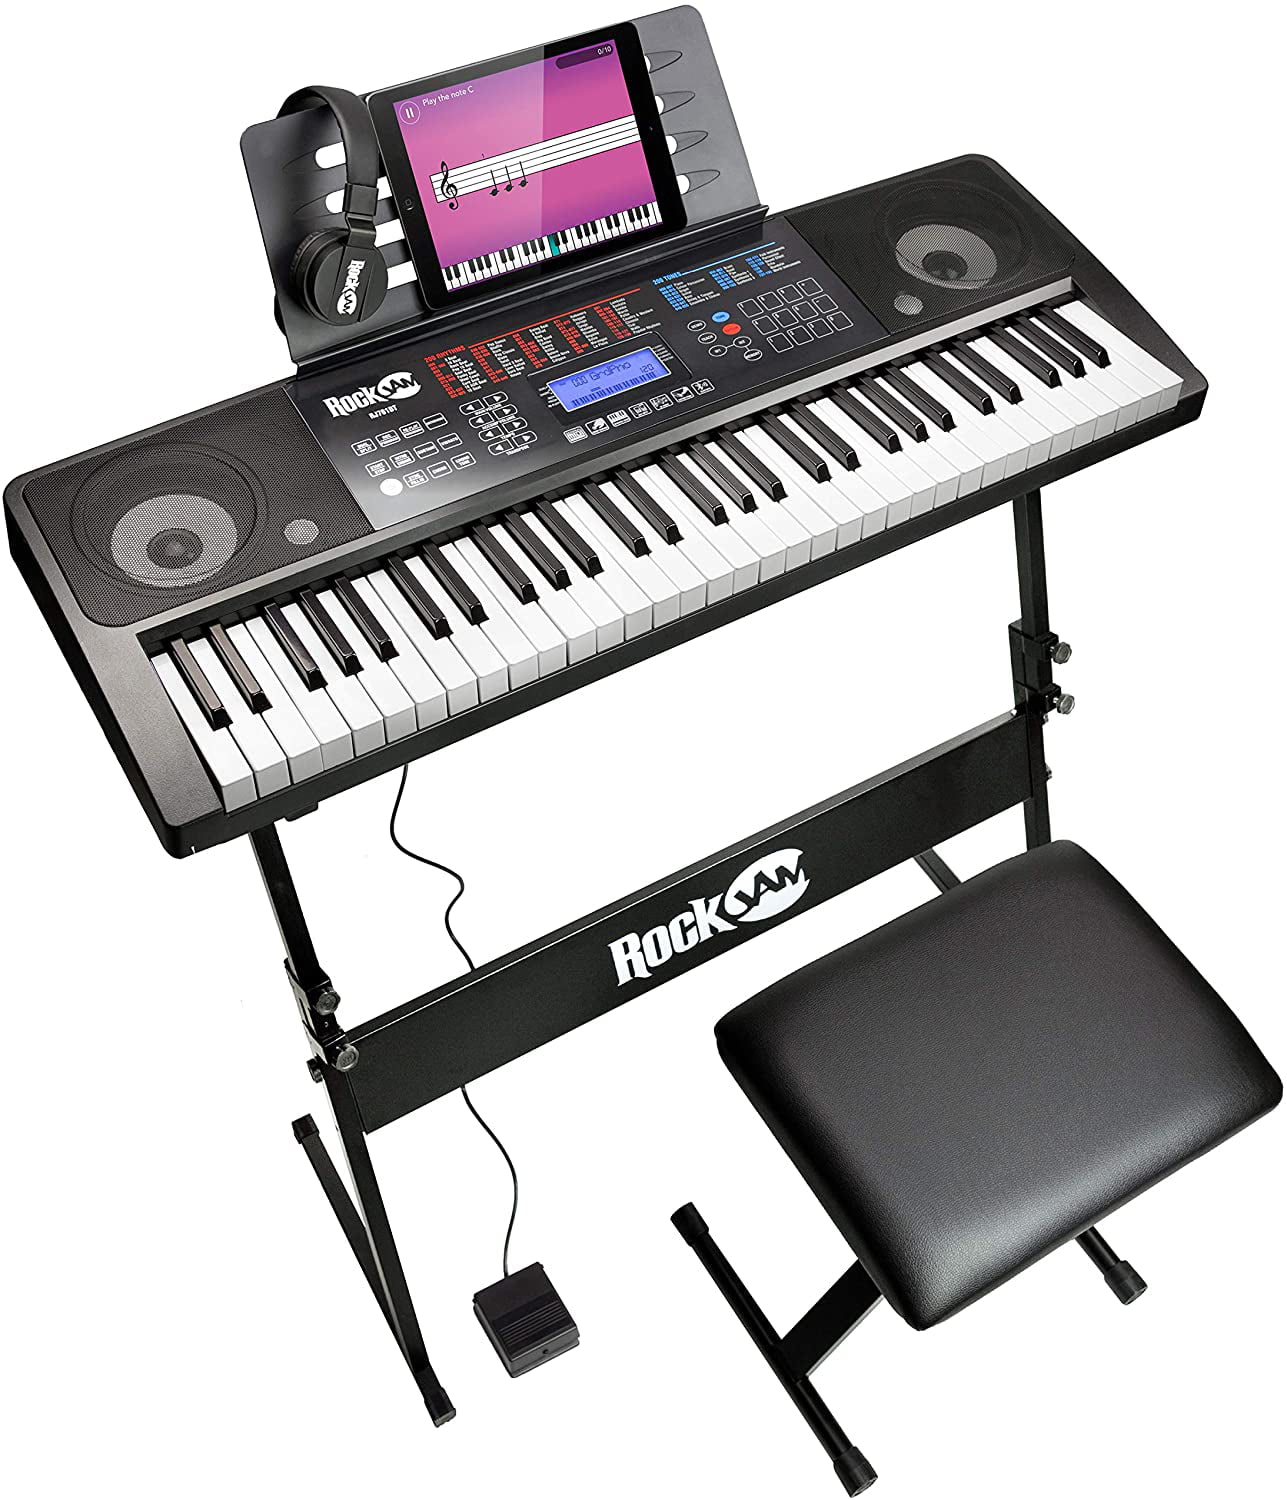 Microphone,Piano Stand,Full Size Keys/LCD Screen for Beginner Adults and Kids Mustar 61 Lighted Keys Teaching Electronic Keyboard Piano w/MIDI USB/Sturdy App Headphones